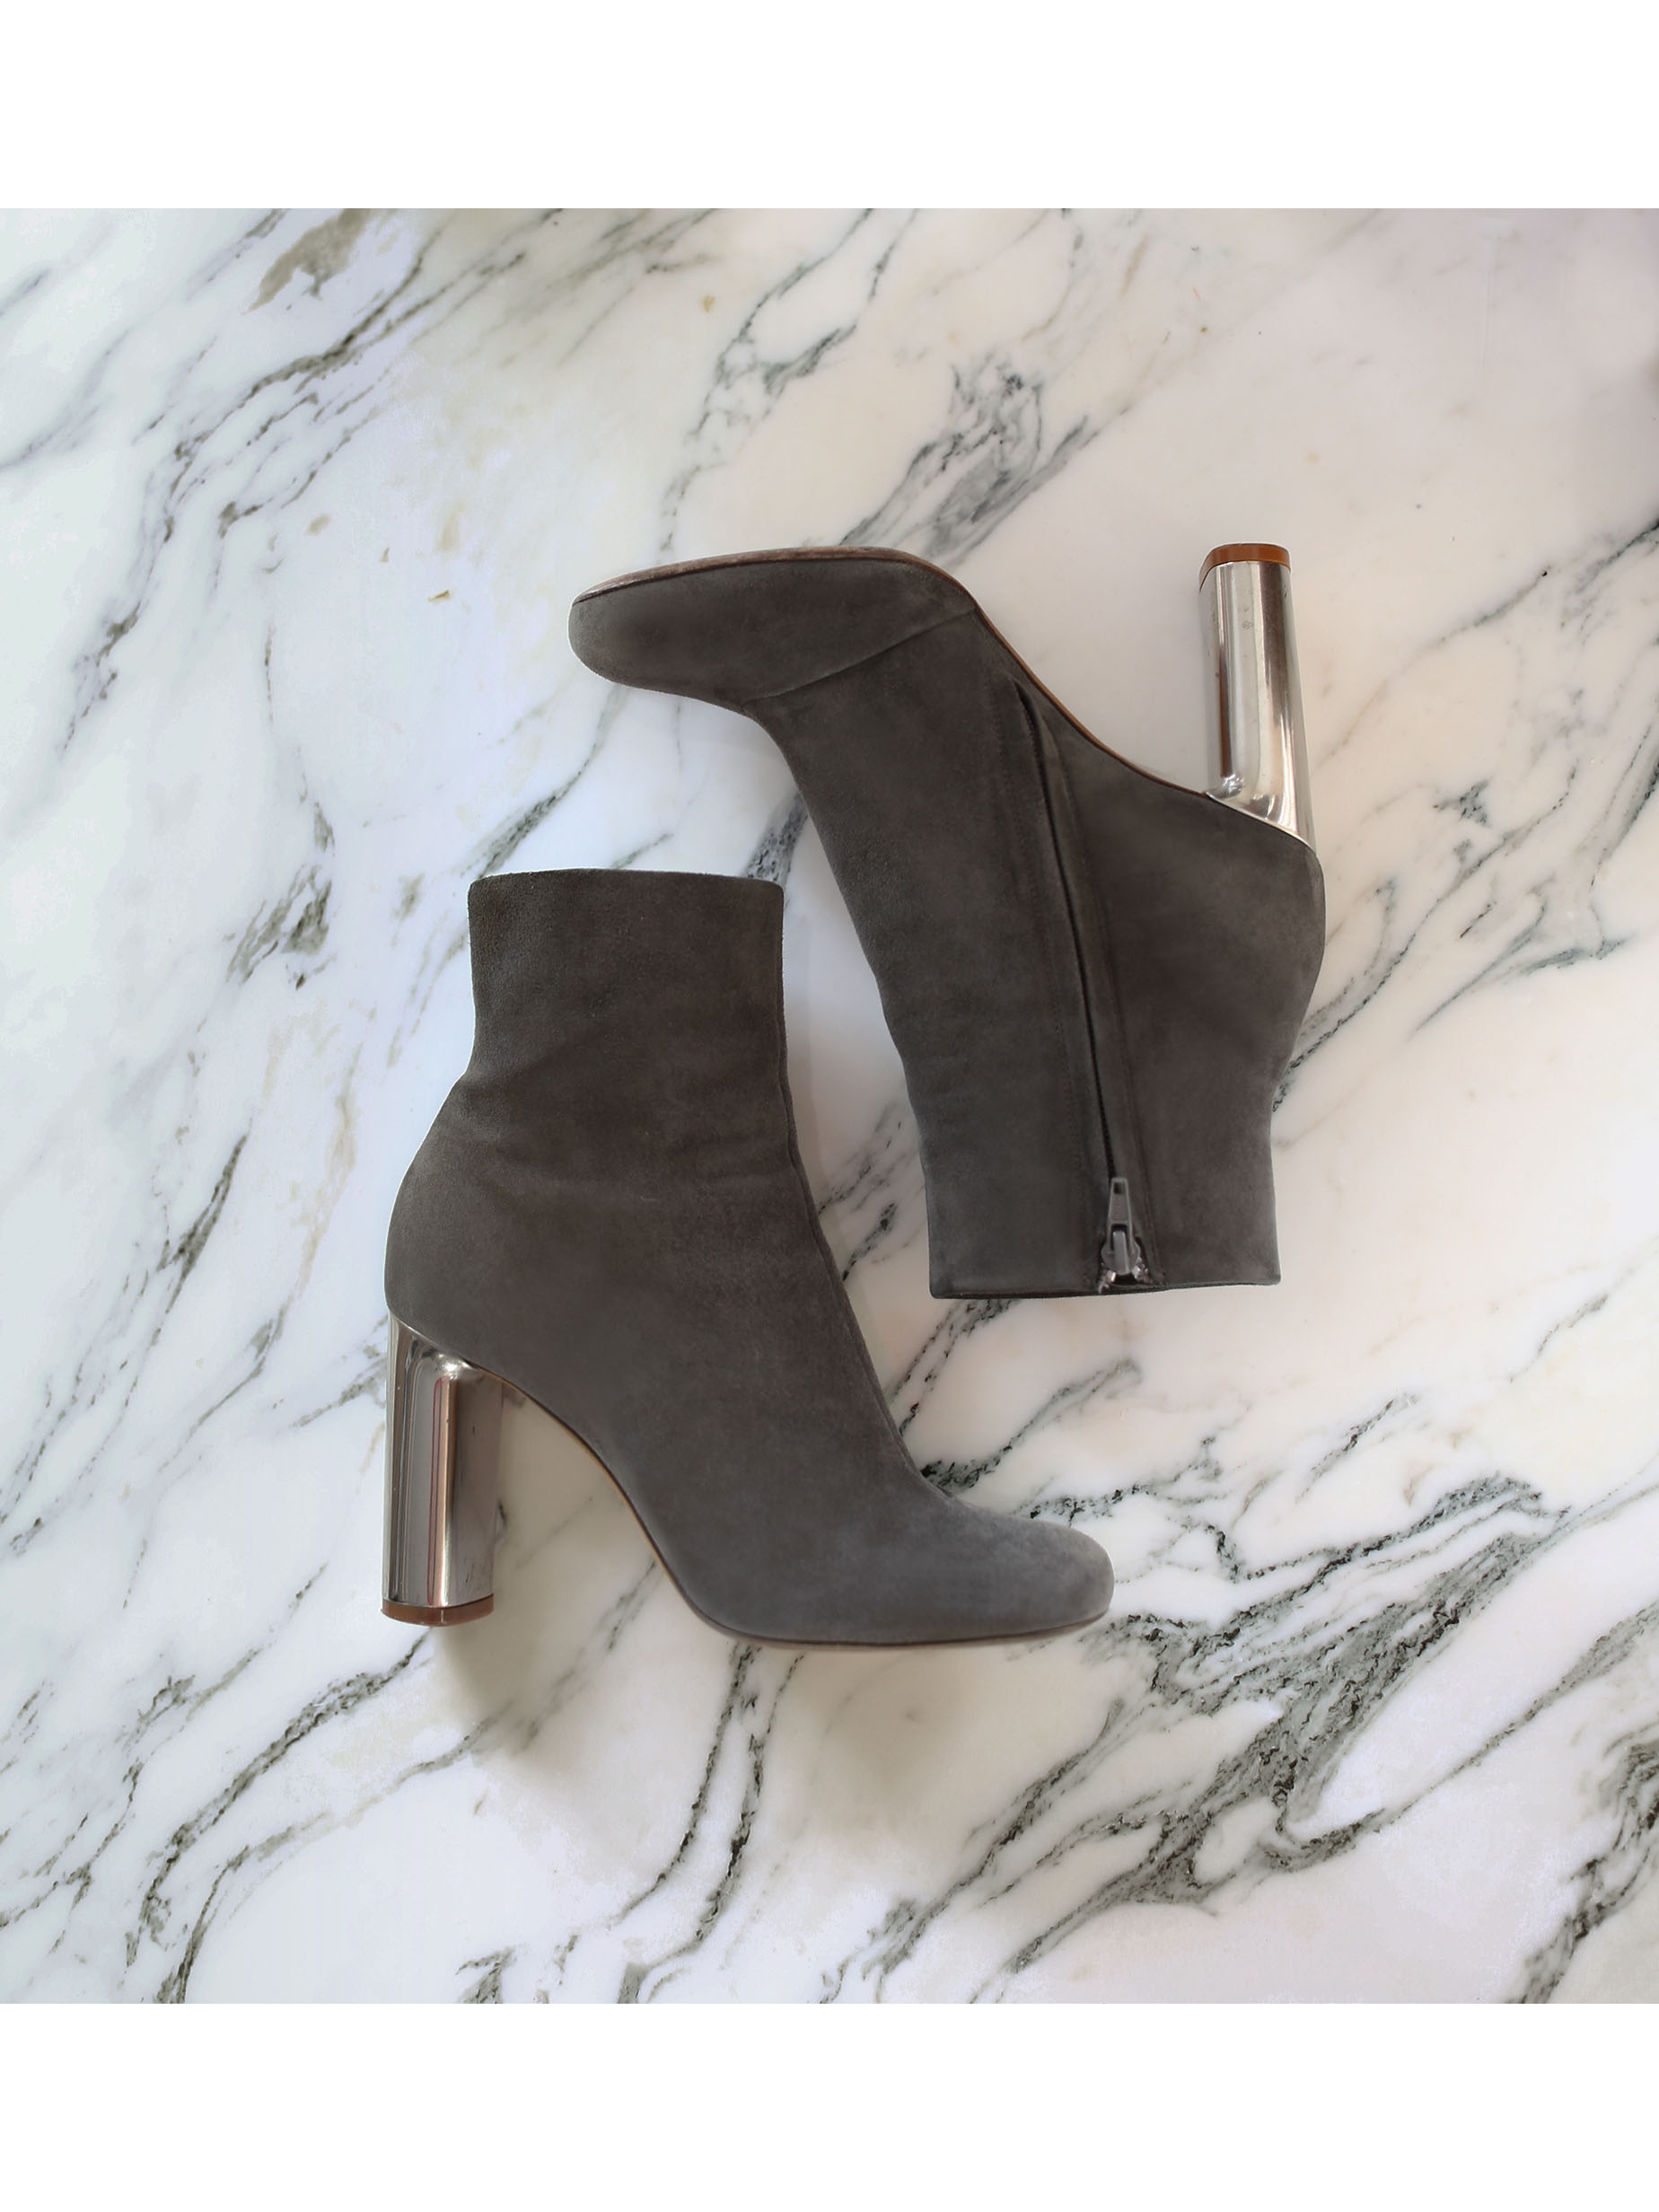 black ankle boots with silver heel